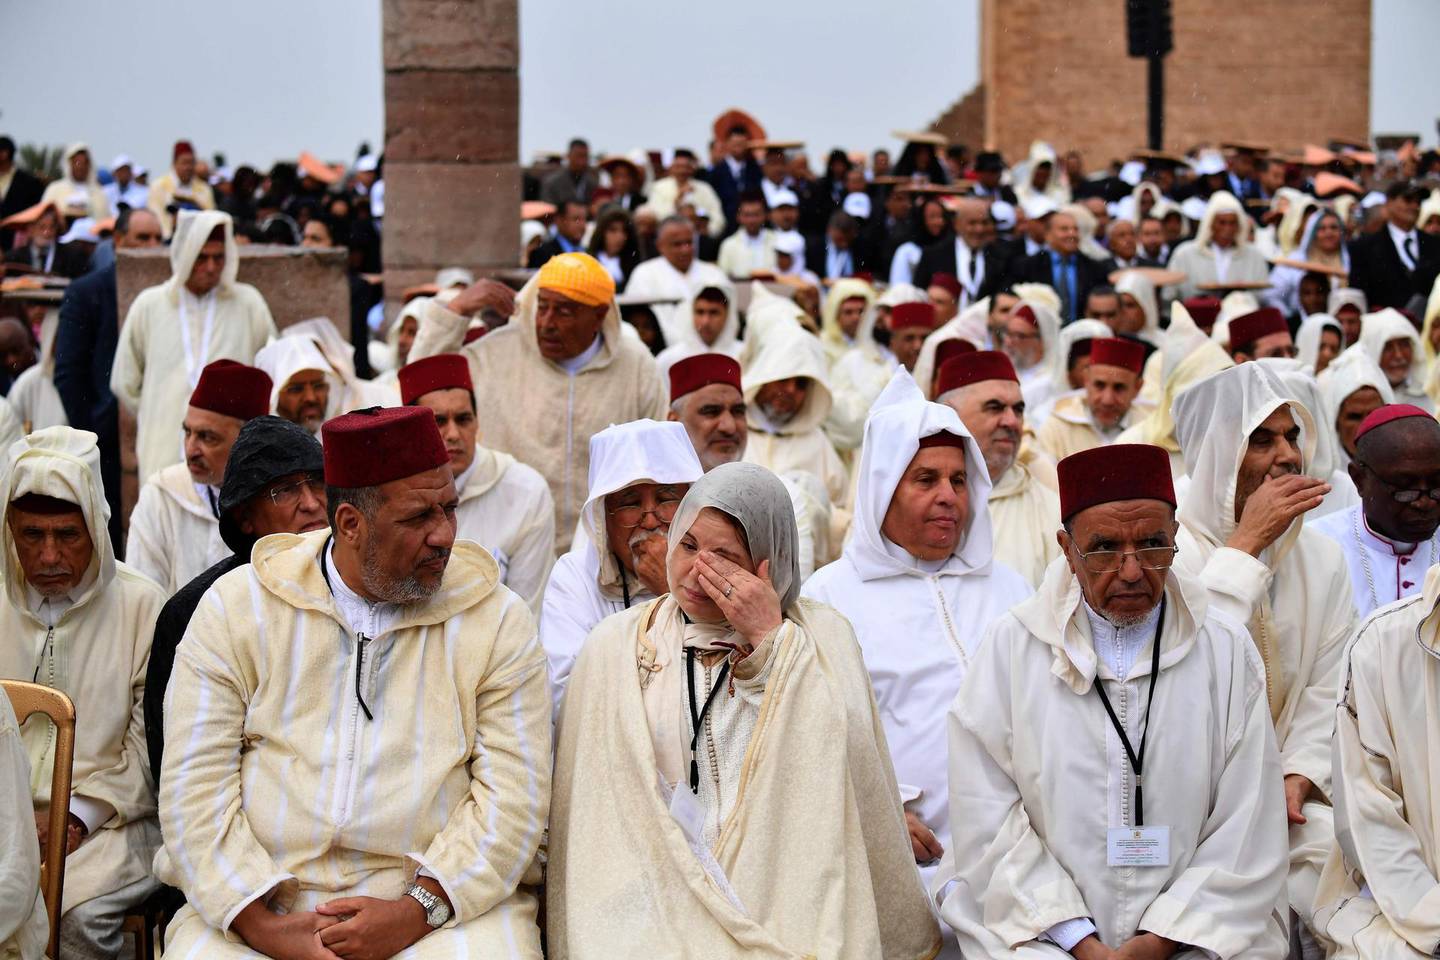 Moroccans listen to a speech delivered by Pope Francis in the capital Rabat on March 30, 2019 during the pontiff's visit which will see him meet Muslim leaders and migrants ahead of a mass with the minority Catholic community.  / AFP / Alberto PIZZOLI
